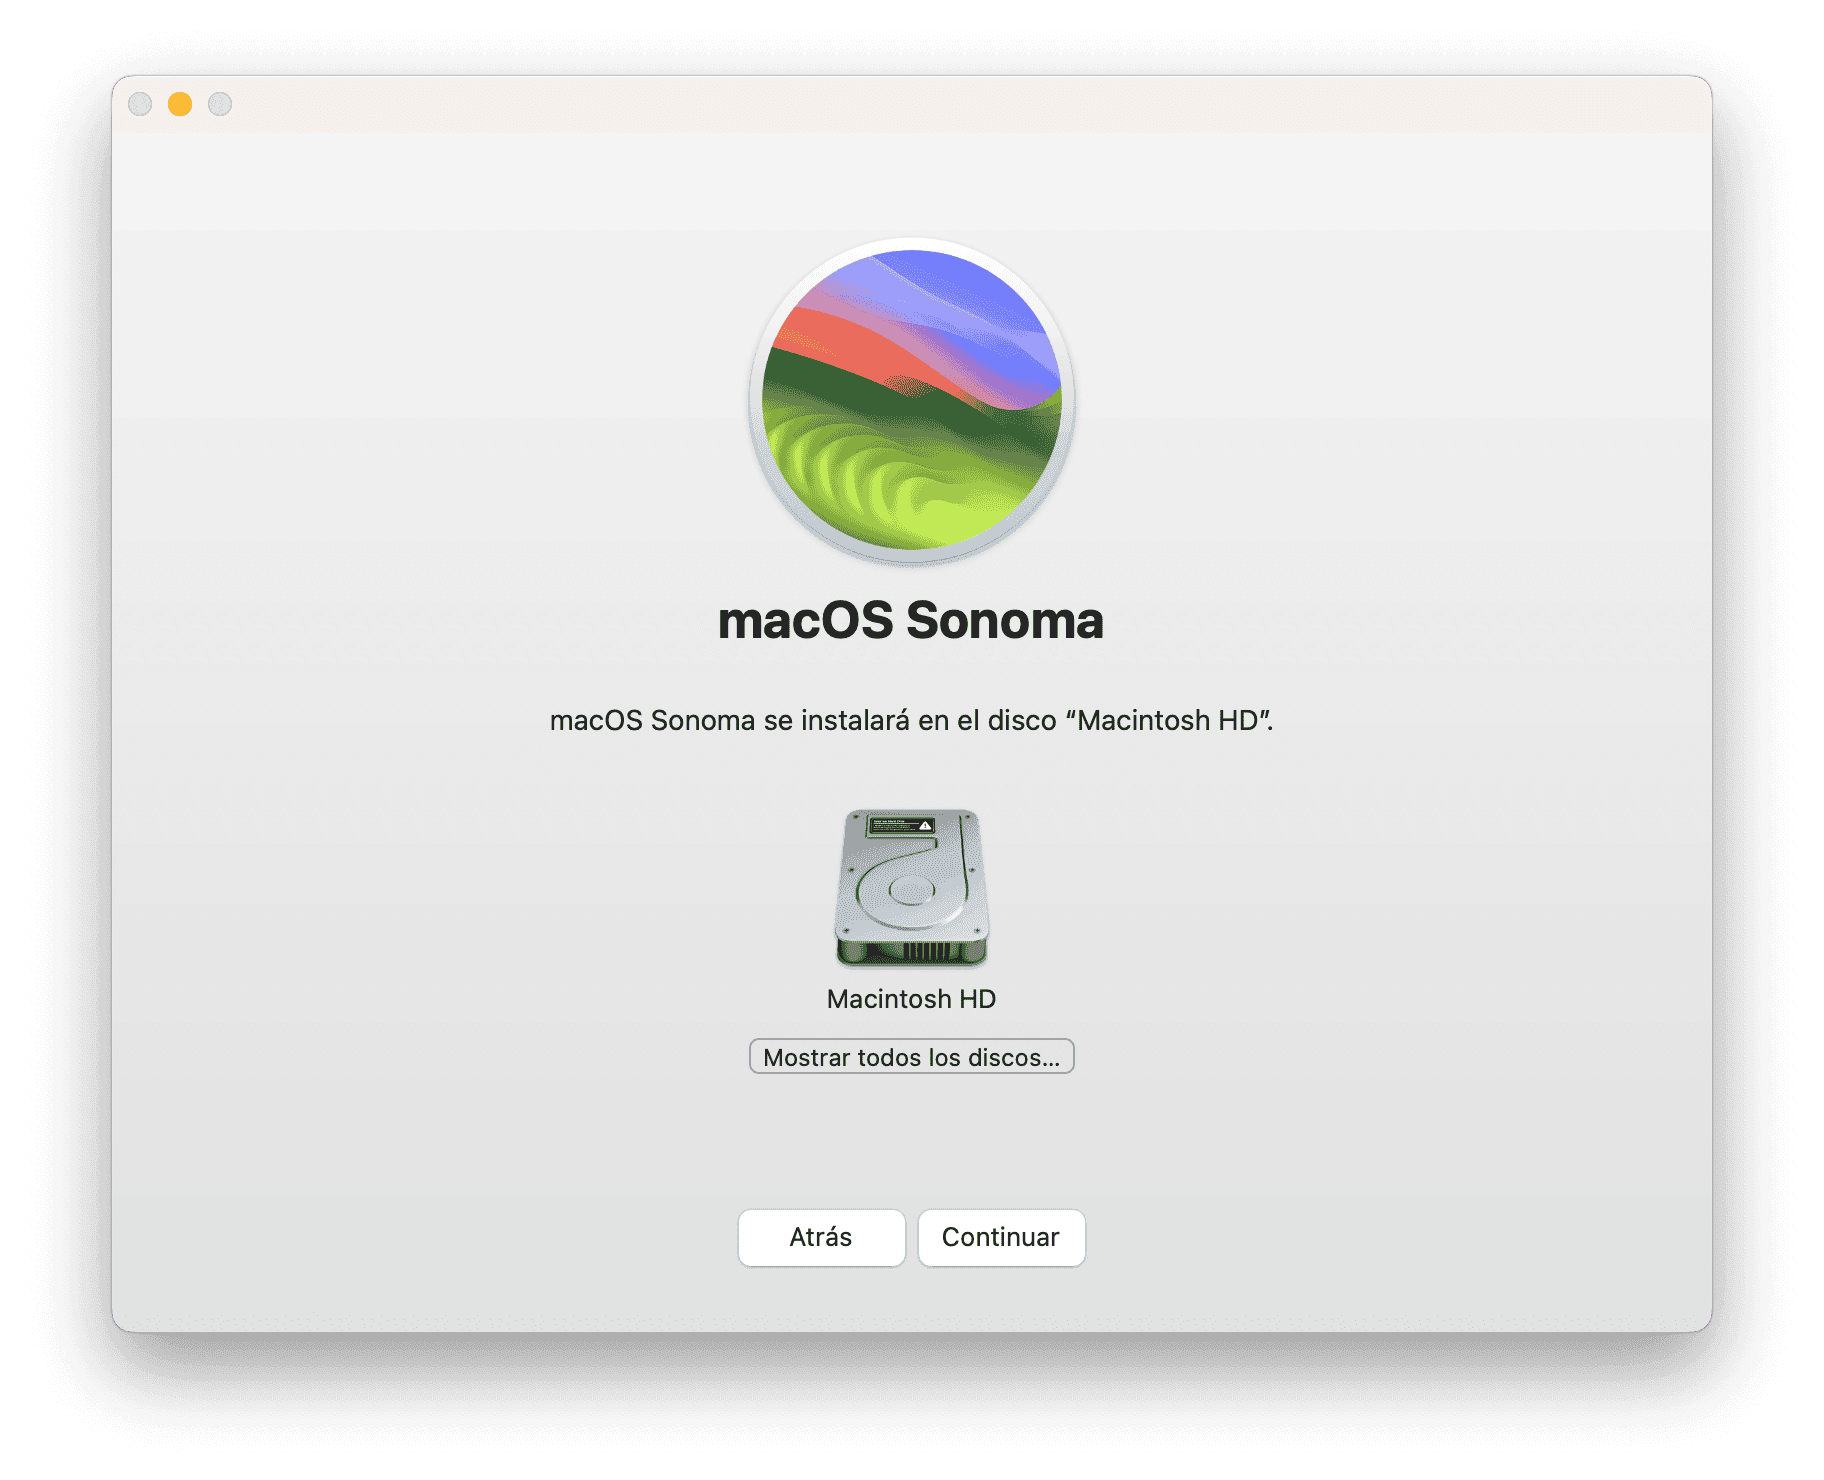 install-macos-sonoma-on-external-drive-es.png